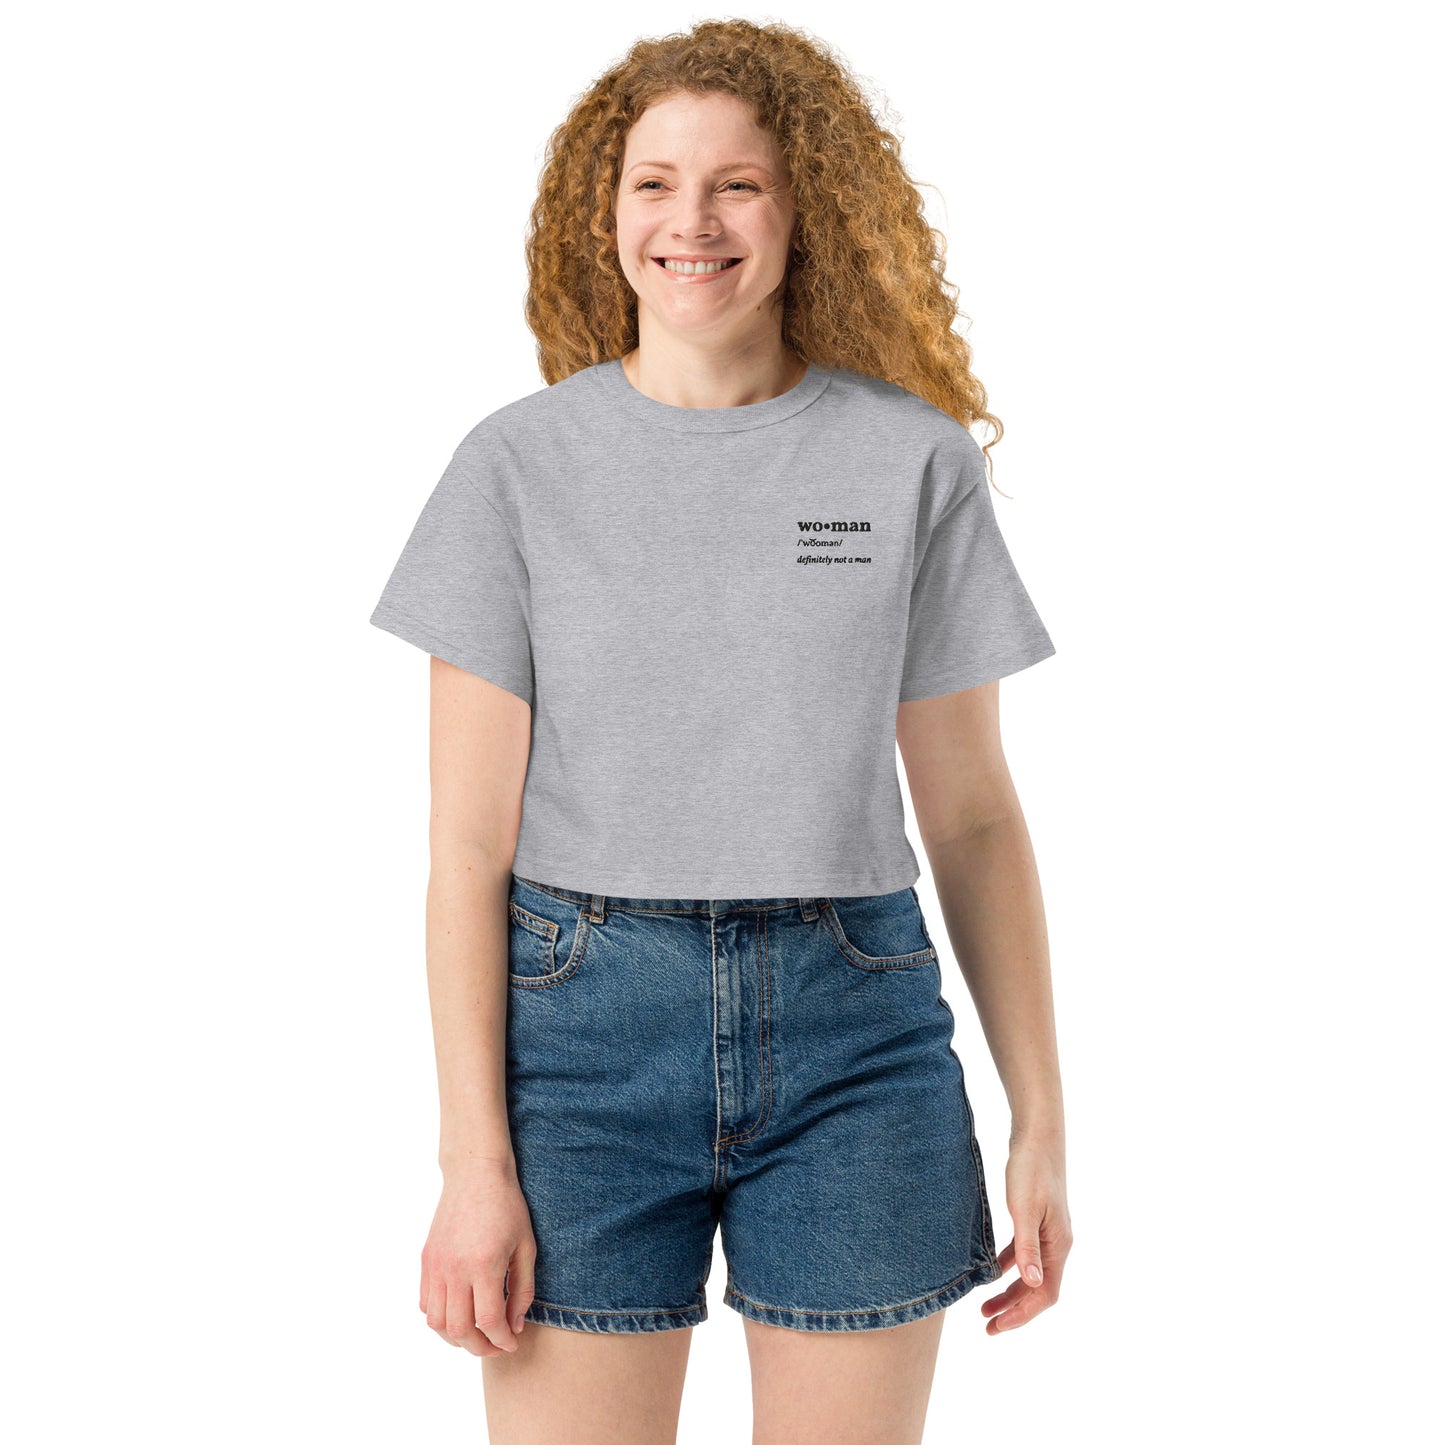 Woman Definition Embroidered Champion Crop Top